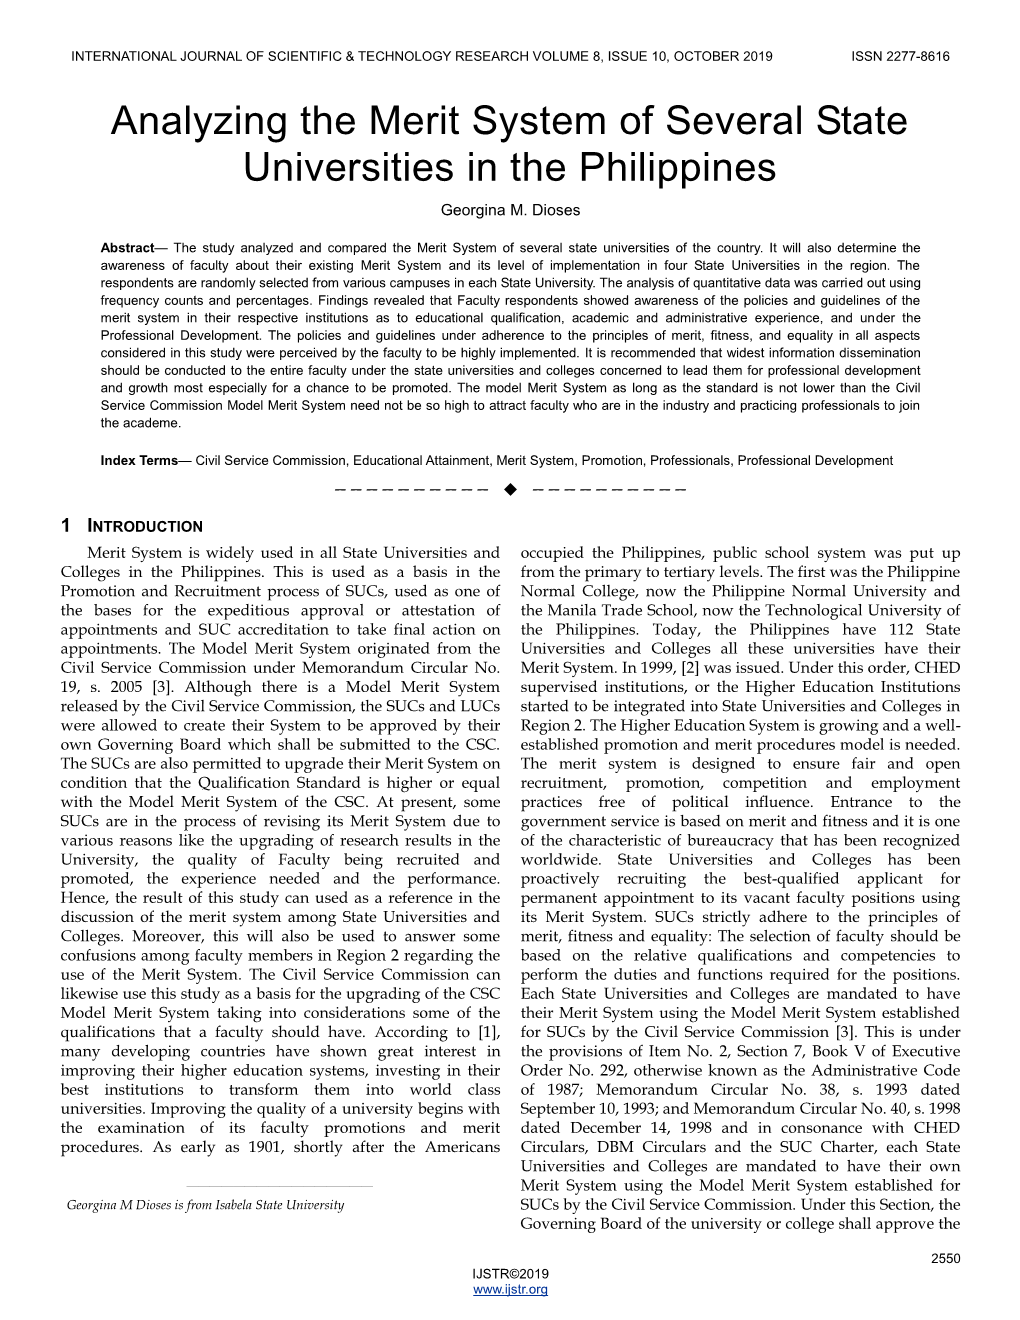 Analyzing the Merit System of Several State Universities in the Philippines Georgina M